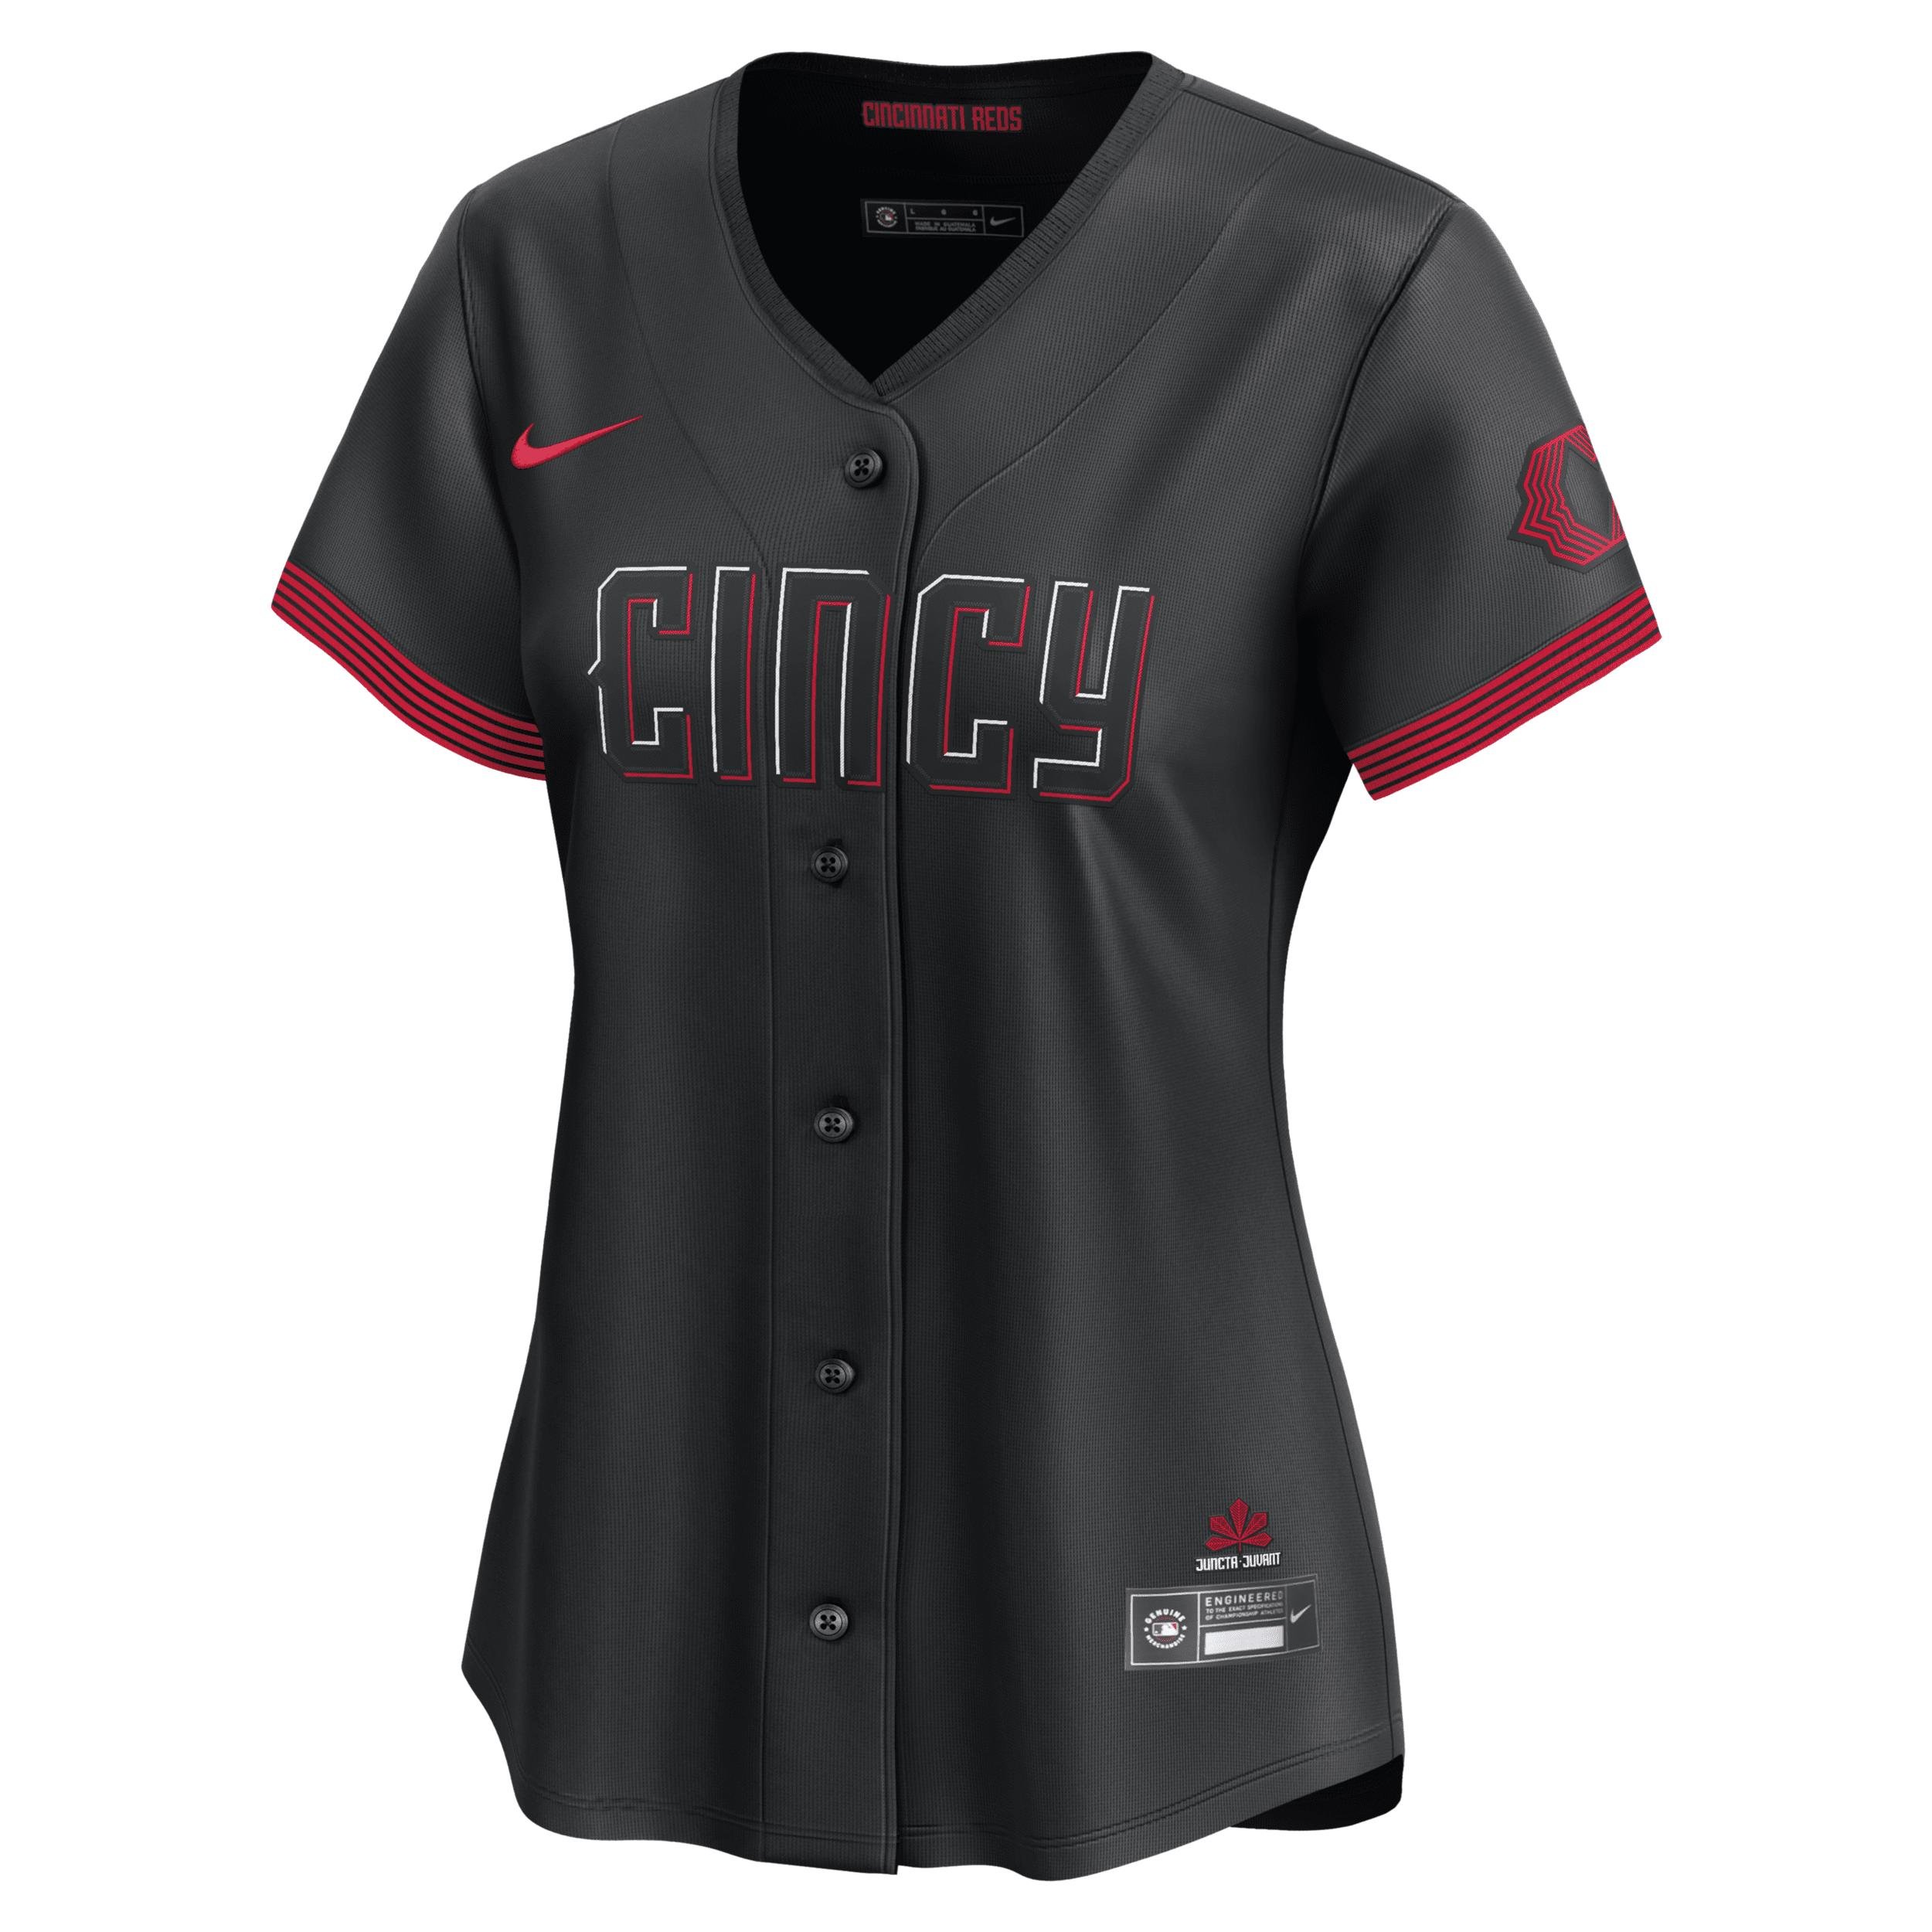 Cincinnati Reds City Connect Nike Women's Dri-FIT ADV MLB Limited Jersey by NIKE